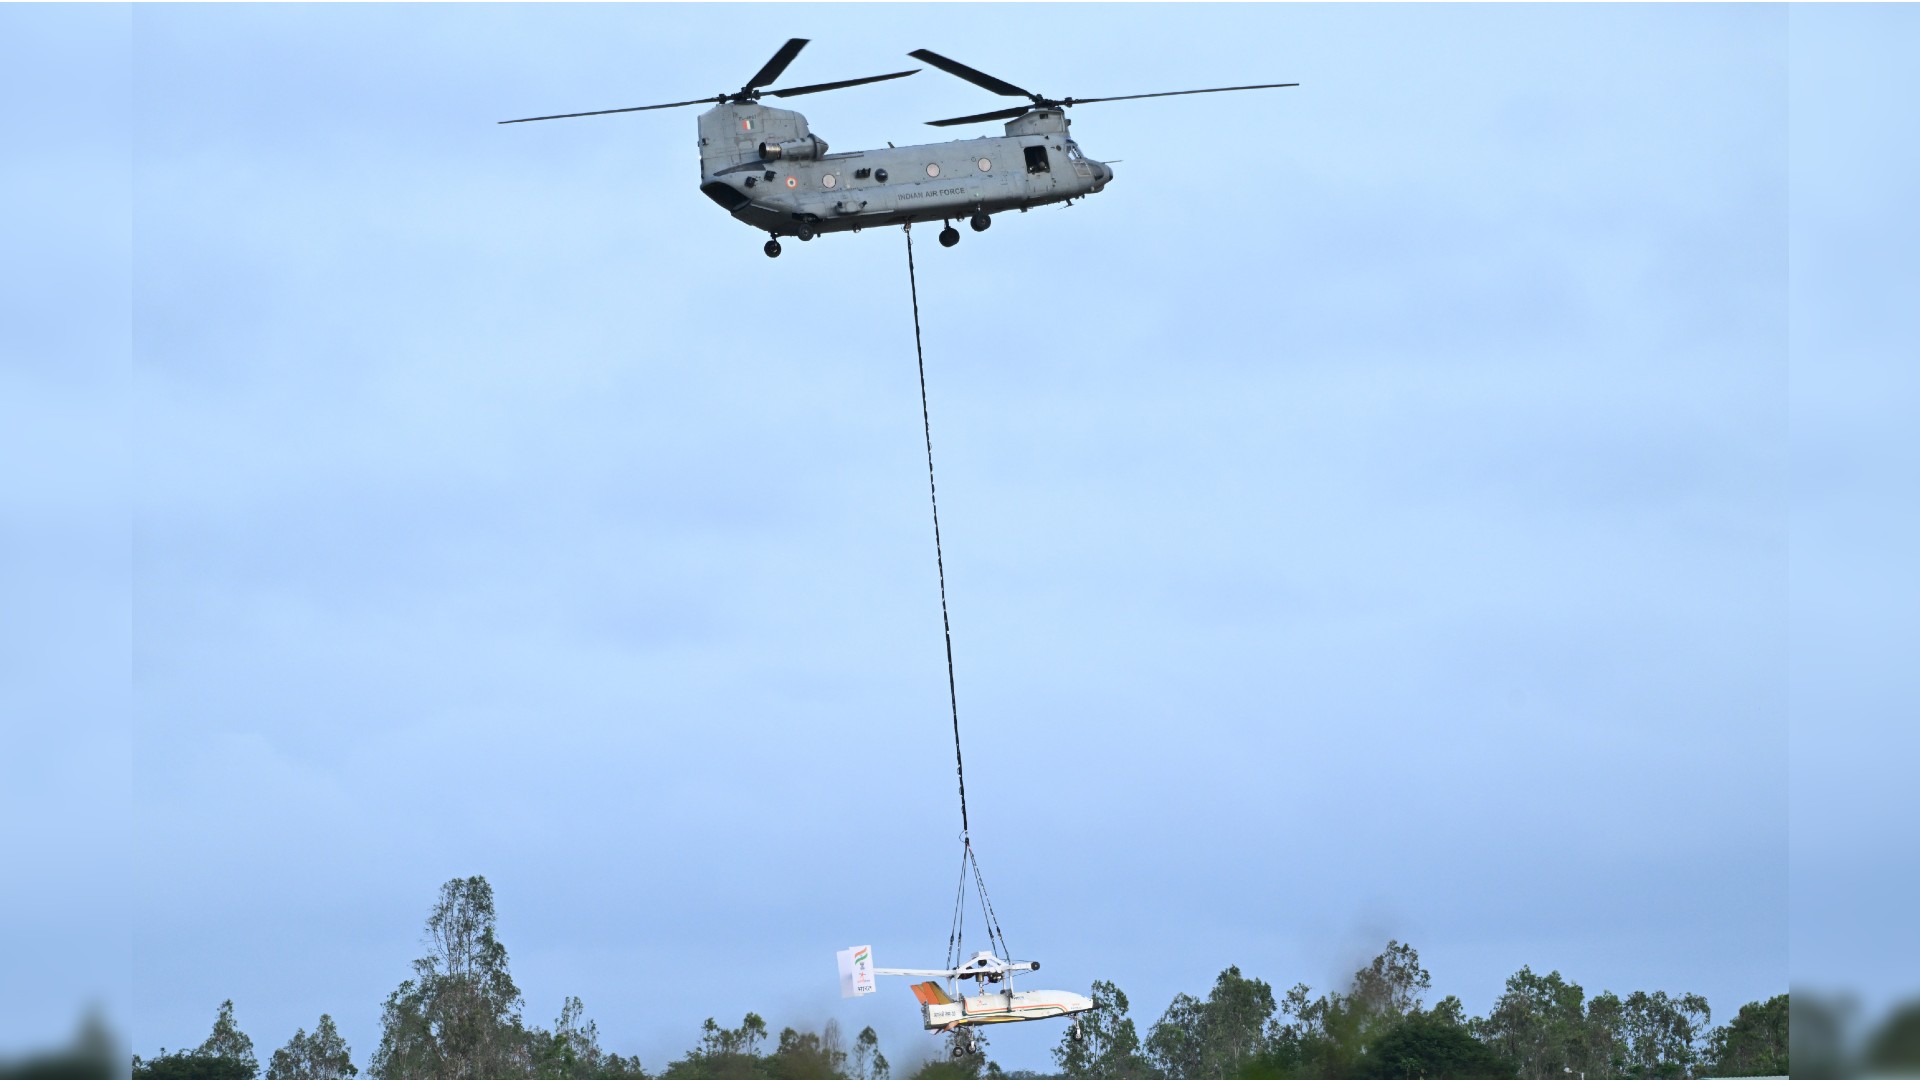 a large twin-rotor helicopter carries a white windowless aircraft beneath it at the end of a long cable